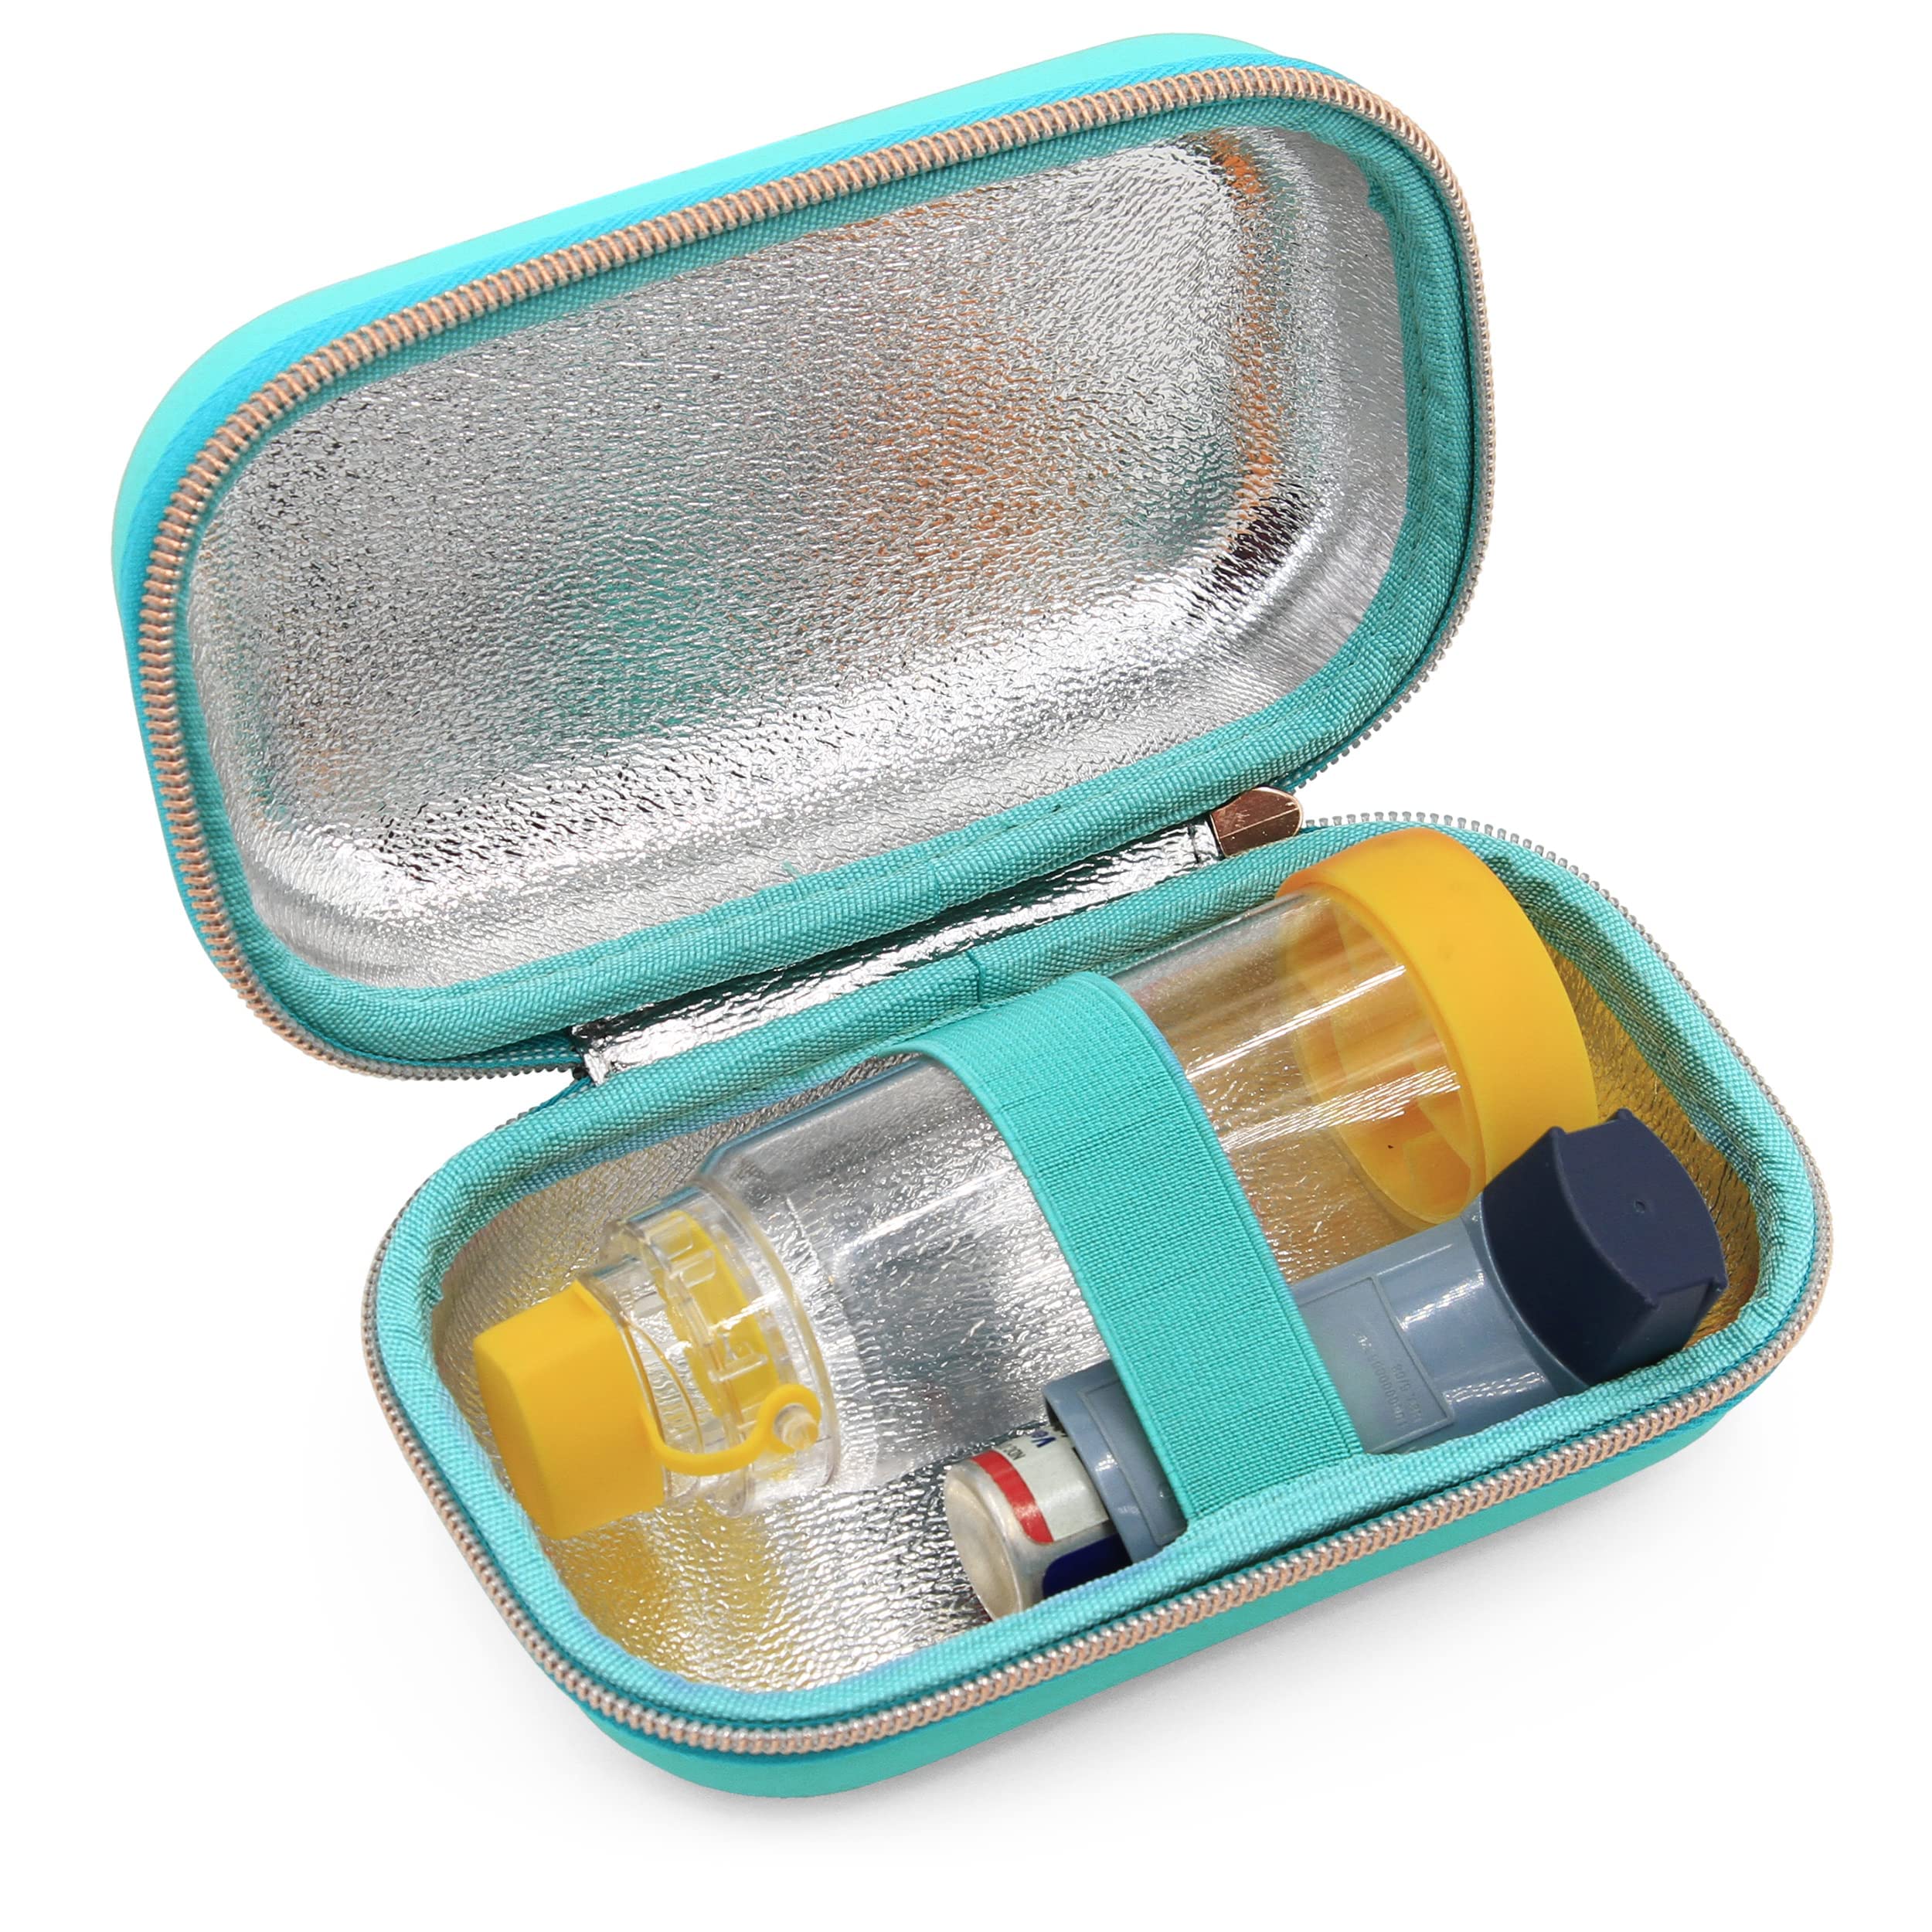 CASEMATIX Turquoise Asthma Inhaler Case for Travel Fits Spacer , Mask and Accessories, Includes Case Only